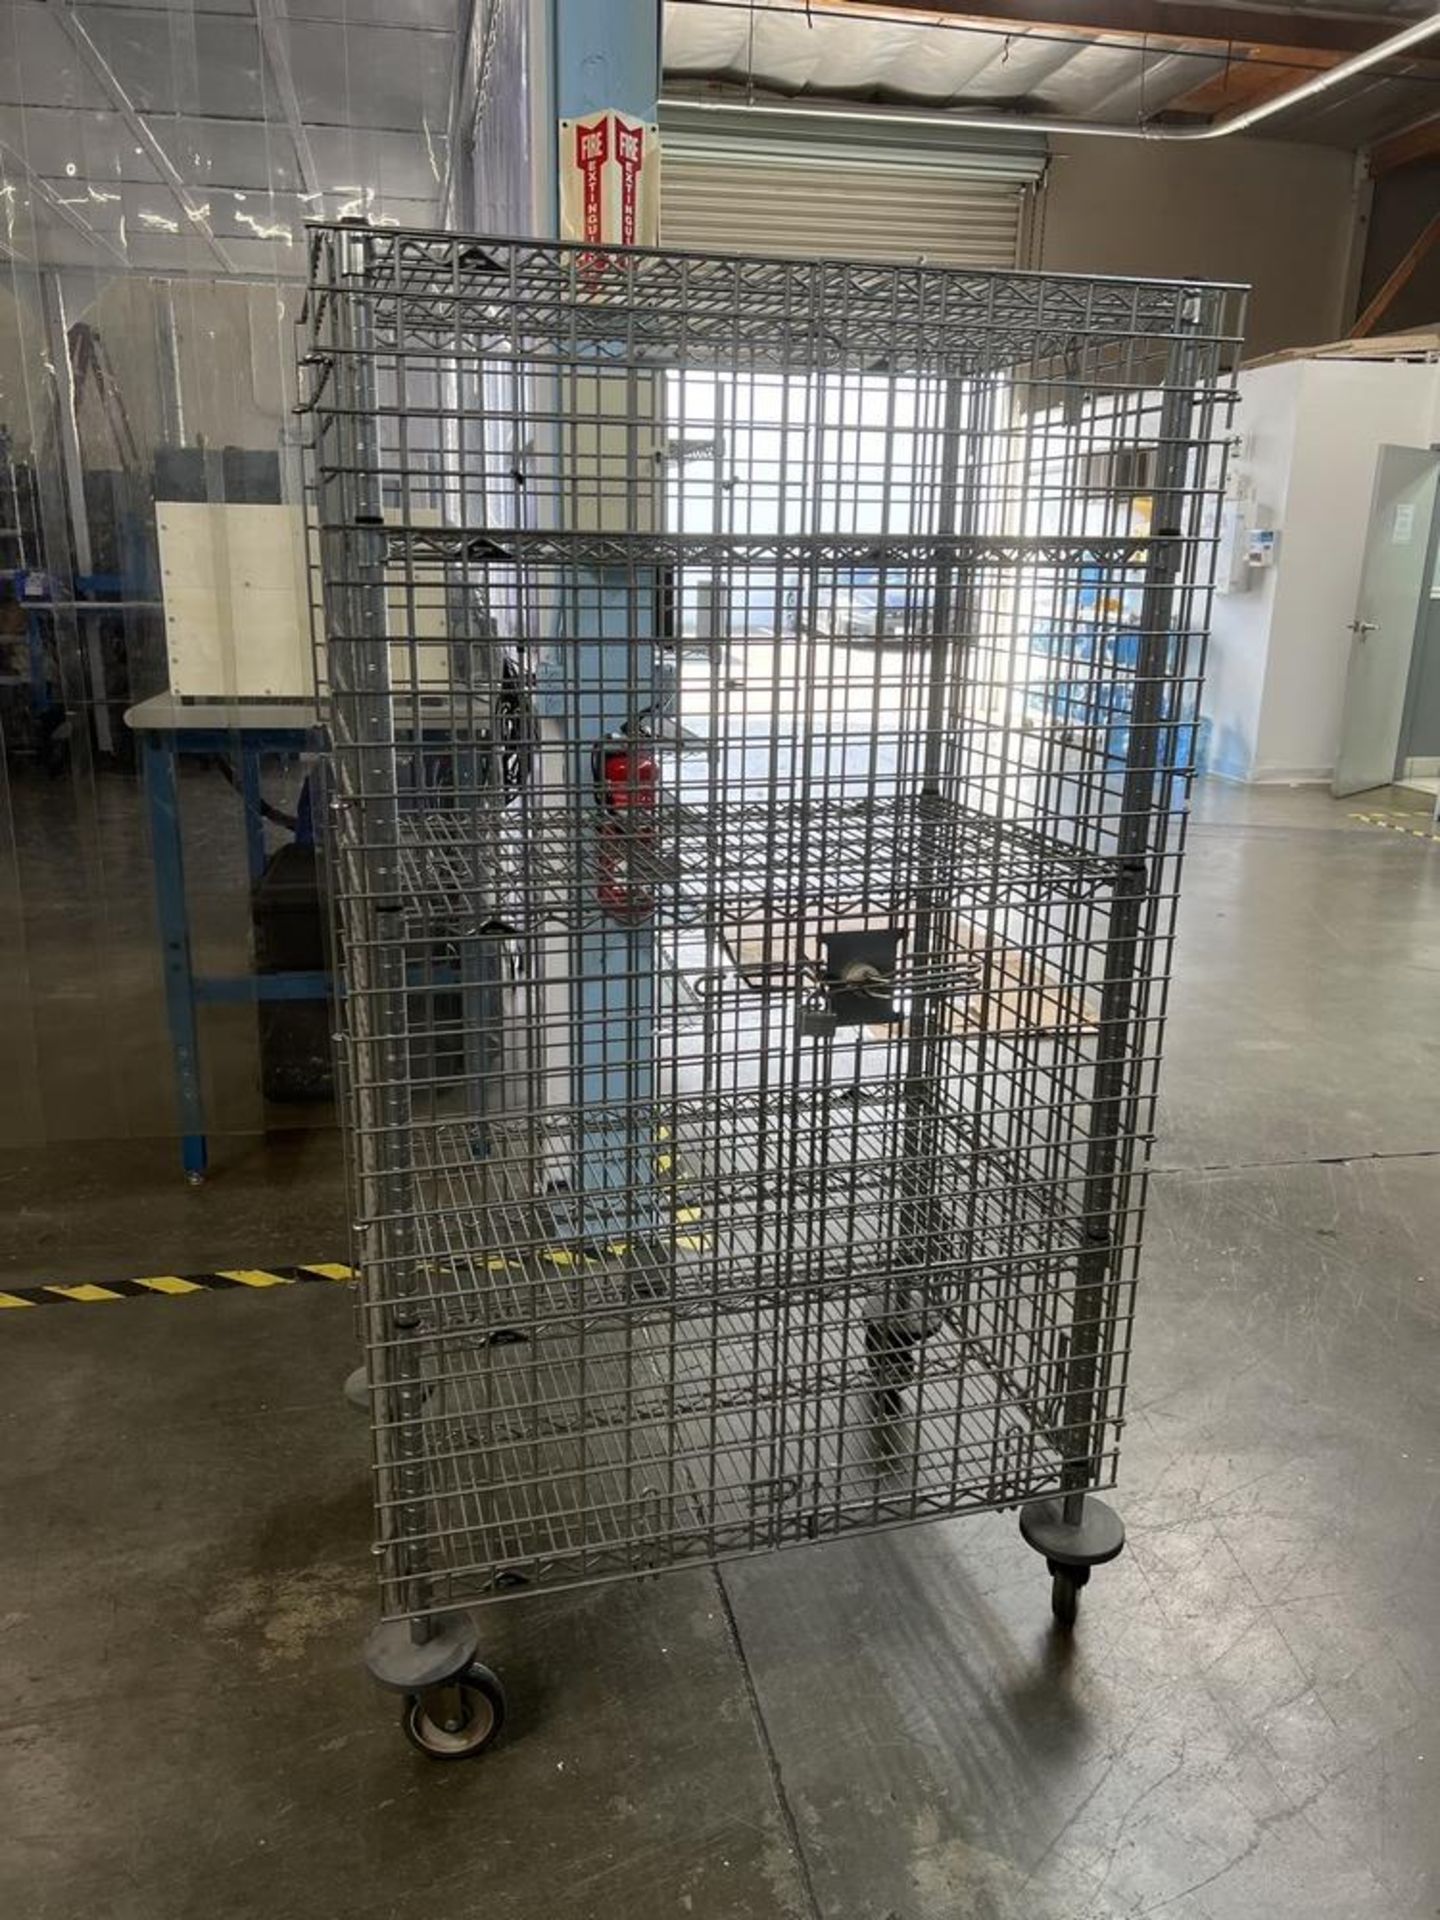 Heavy Duty Rolling Shop Cage 38" x 25" x 67" - Image 2 of 3